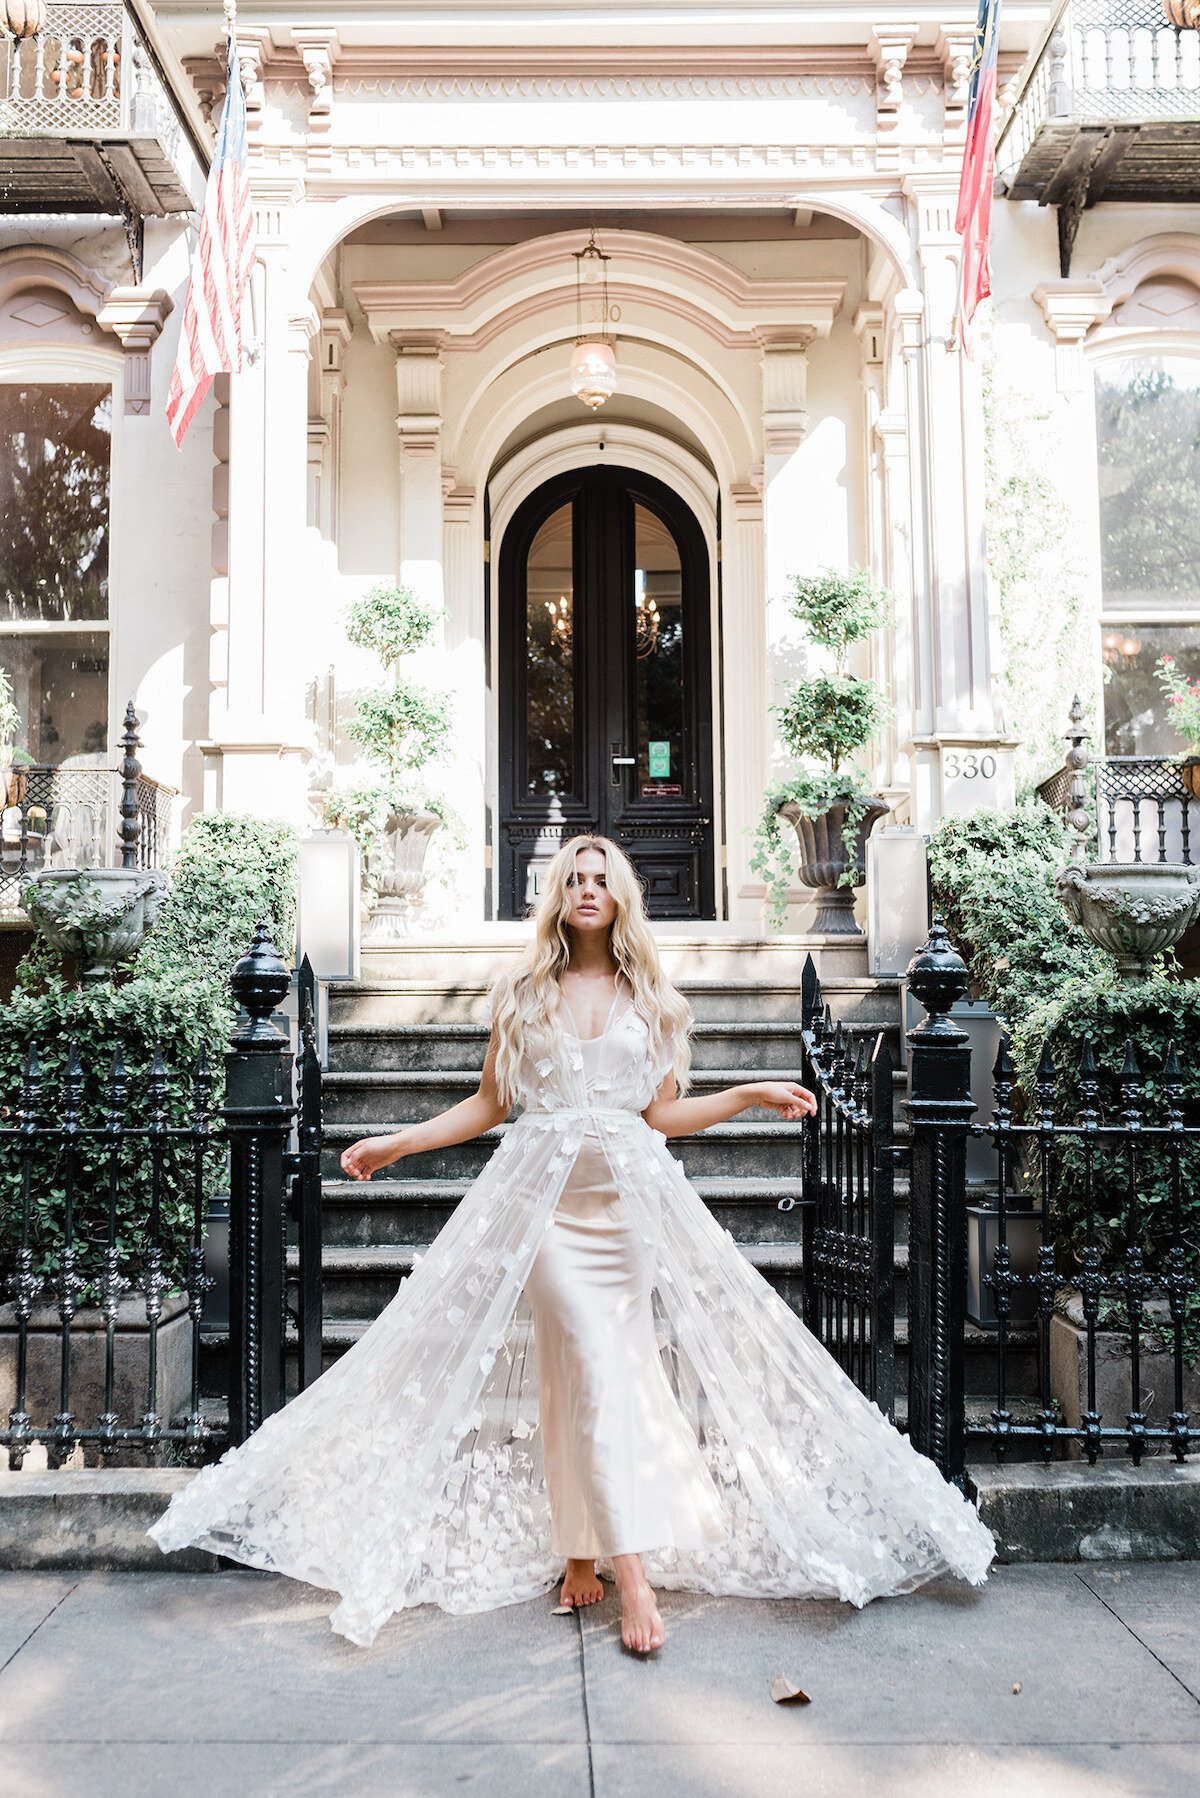 Step into a realm of couture elegance with our high-end bridal photography. Each photograph tells a tale of opulence, highlighting the intricate details and timeless charm of couture fashion.